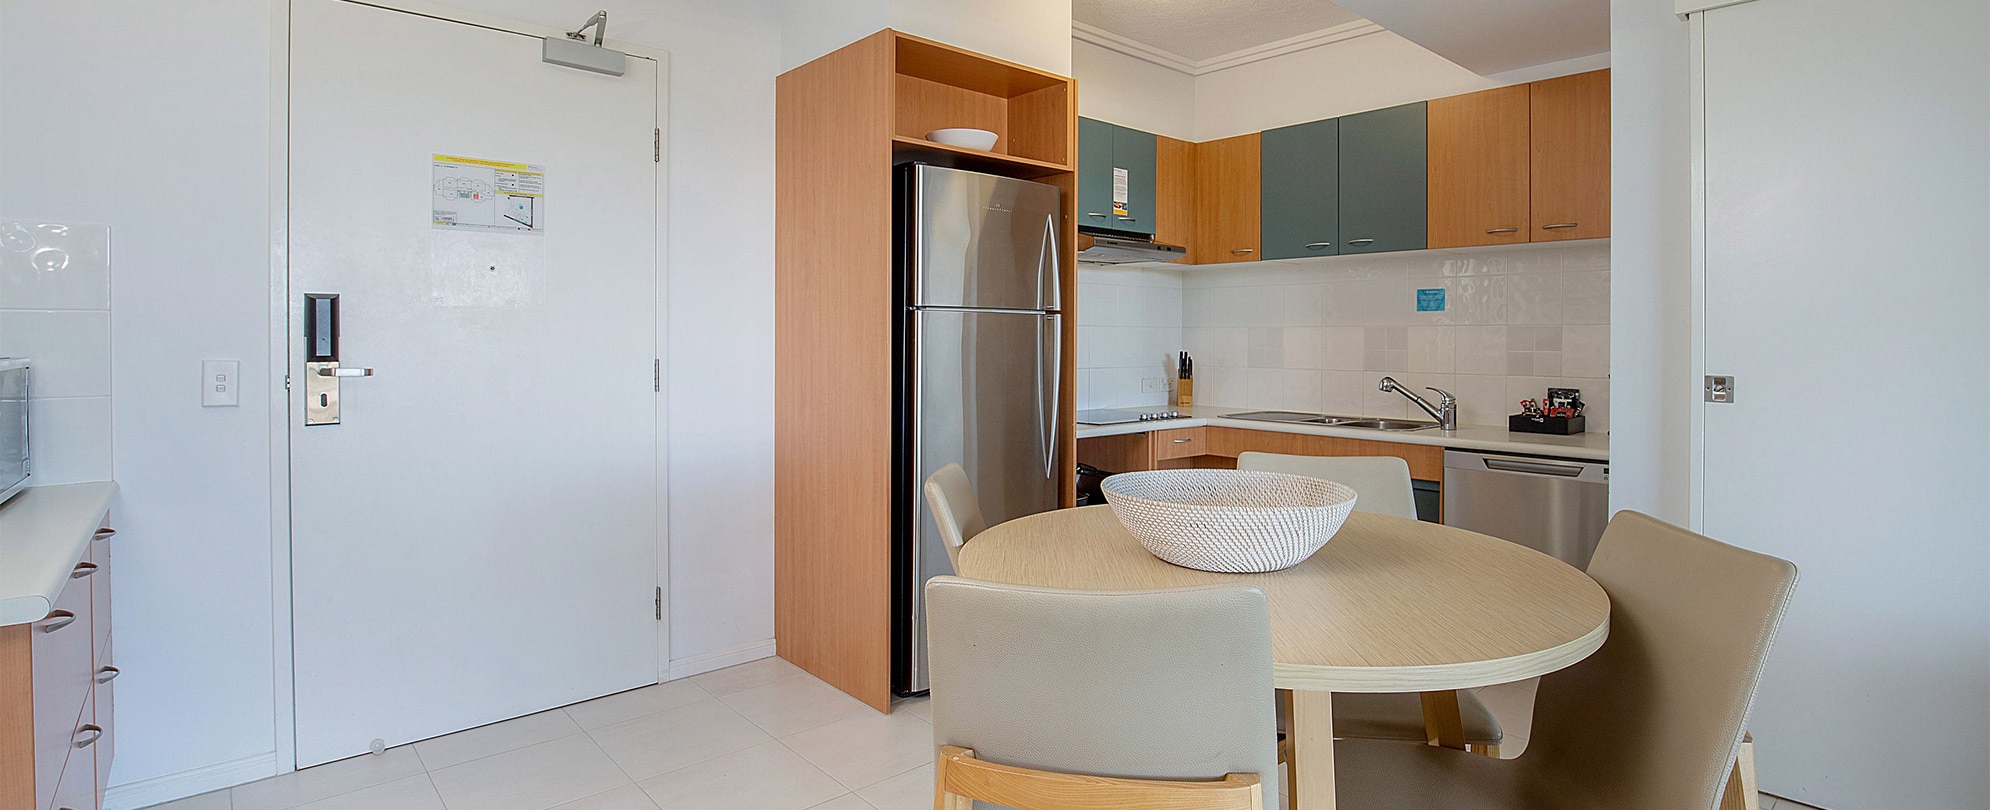 The kitchen and dining area of a handicap accessible suite at Club Wyndham Kirra Beach.